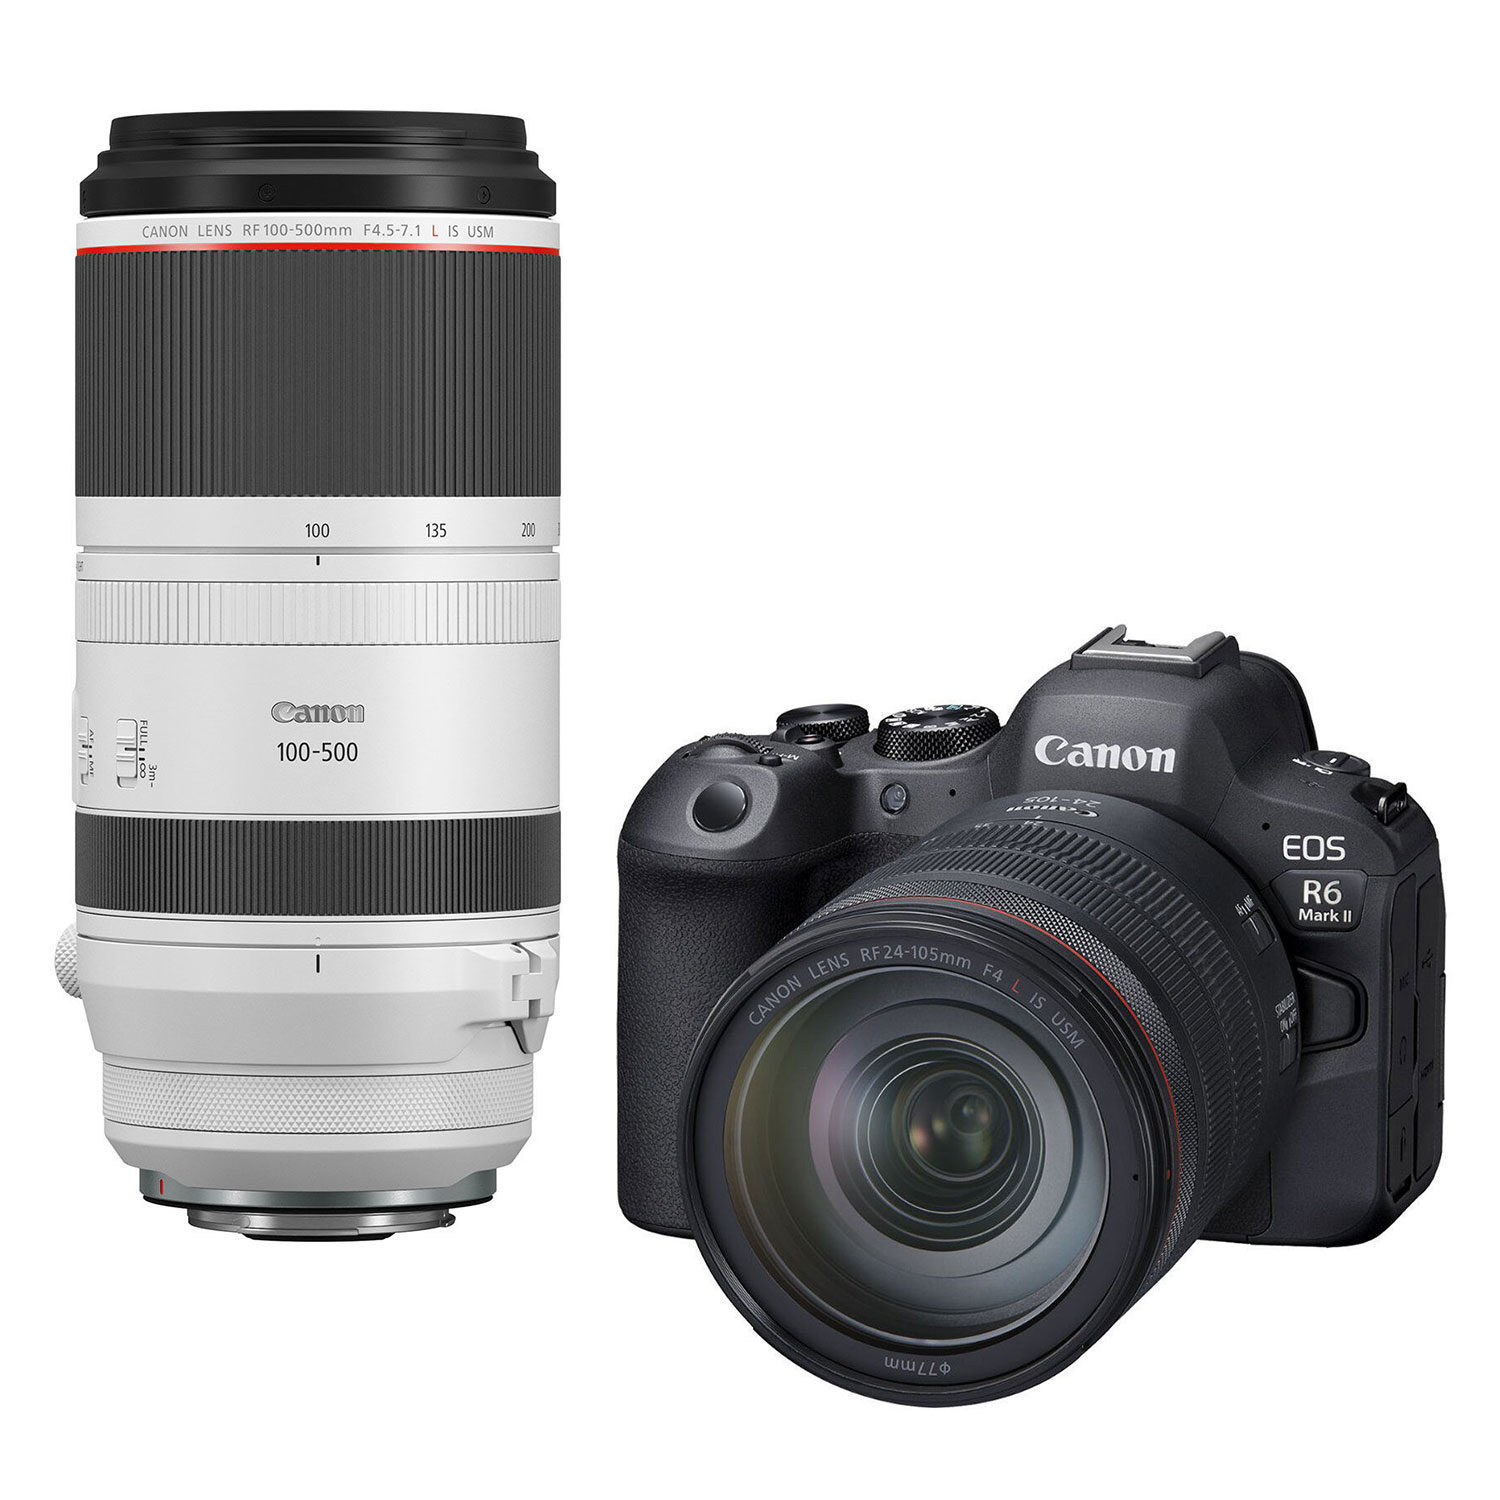 Canon Canon EOS R6 Mark II systeemcamera + RF 24-105mm f/4.0L IS ISM + RF 100-500mm f/4.5-7.1L IS USM